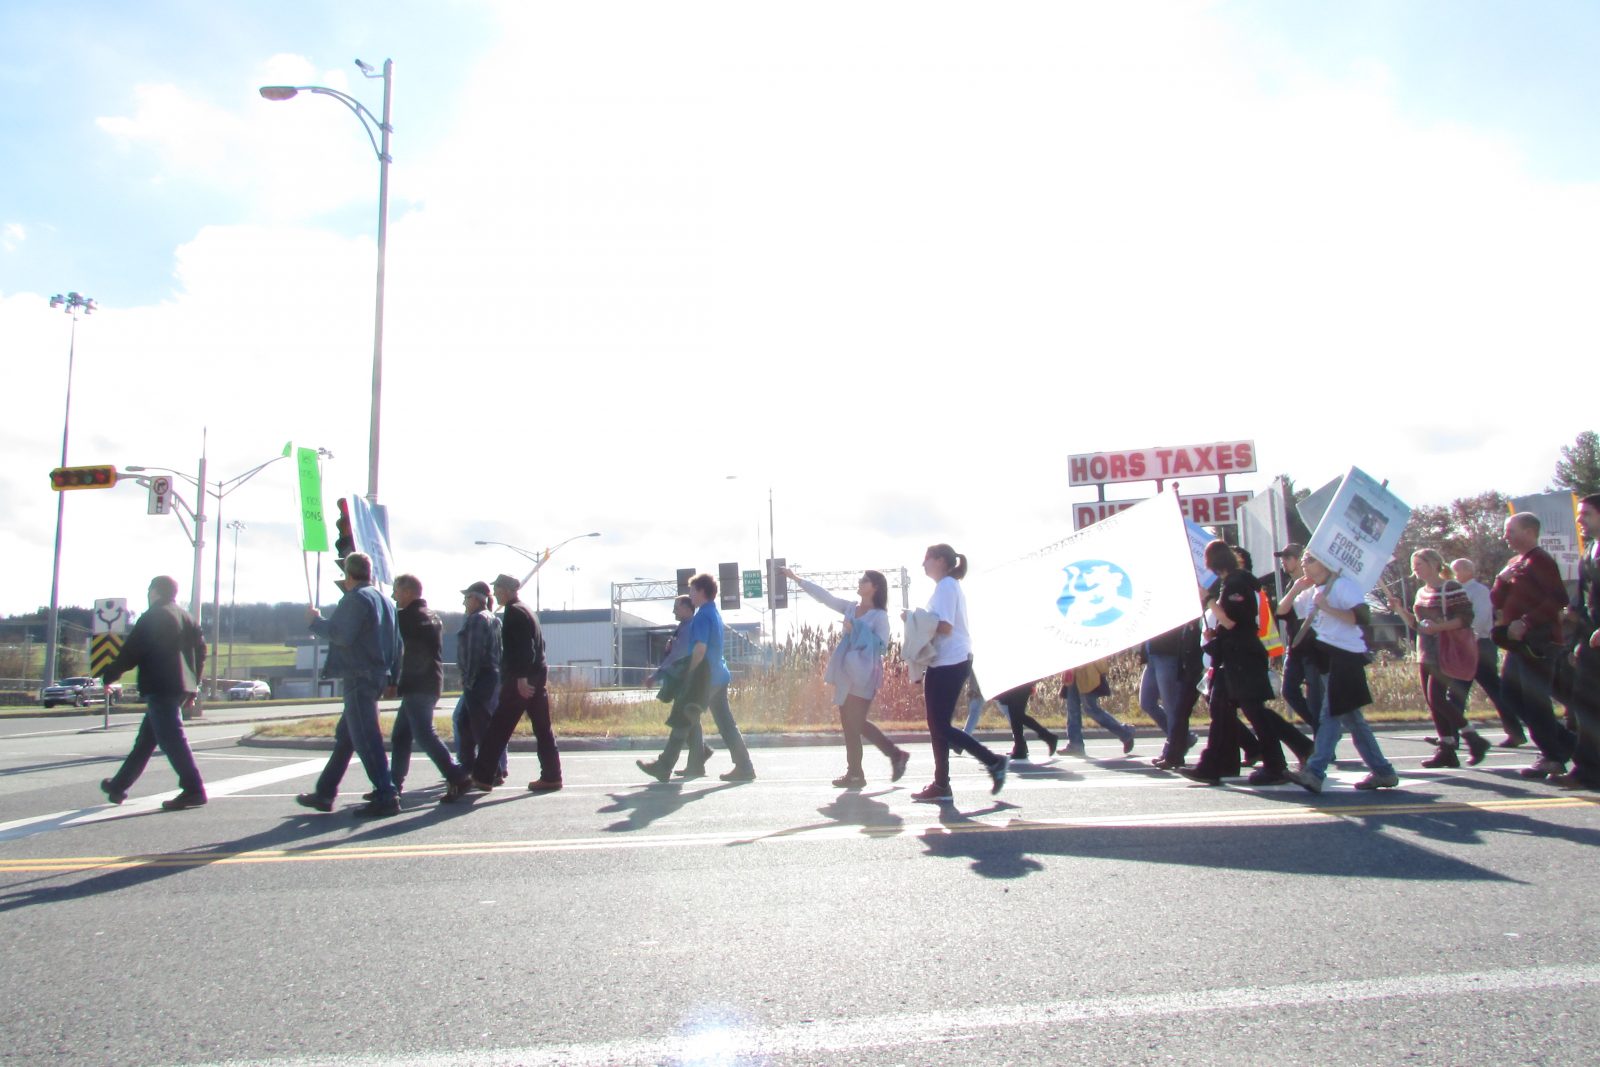 Townships dairy producers protest at the Can/US border